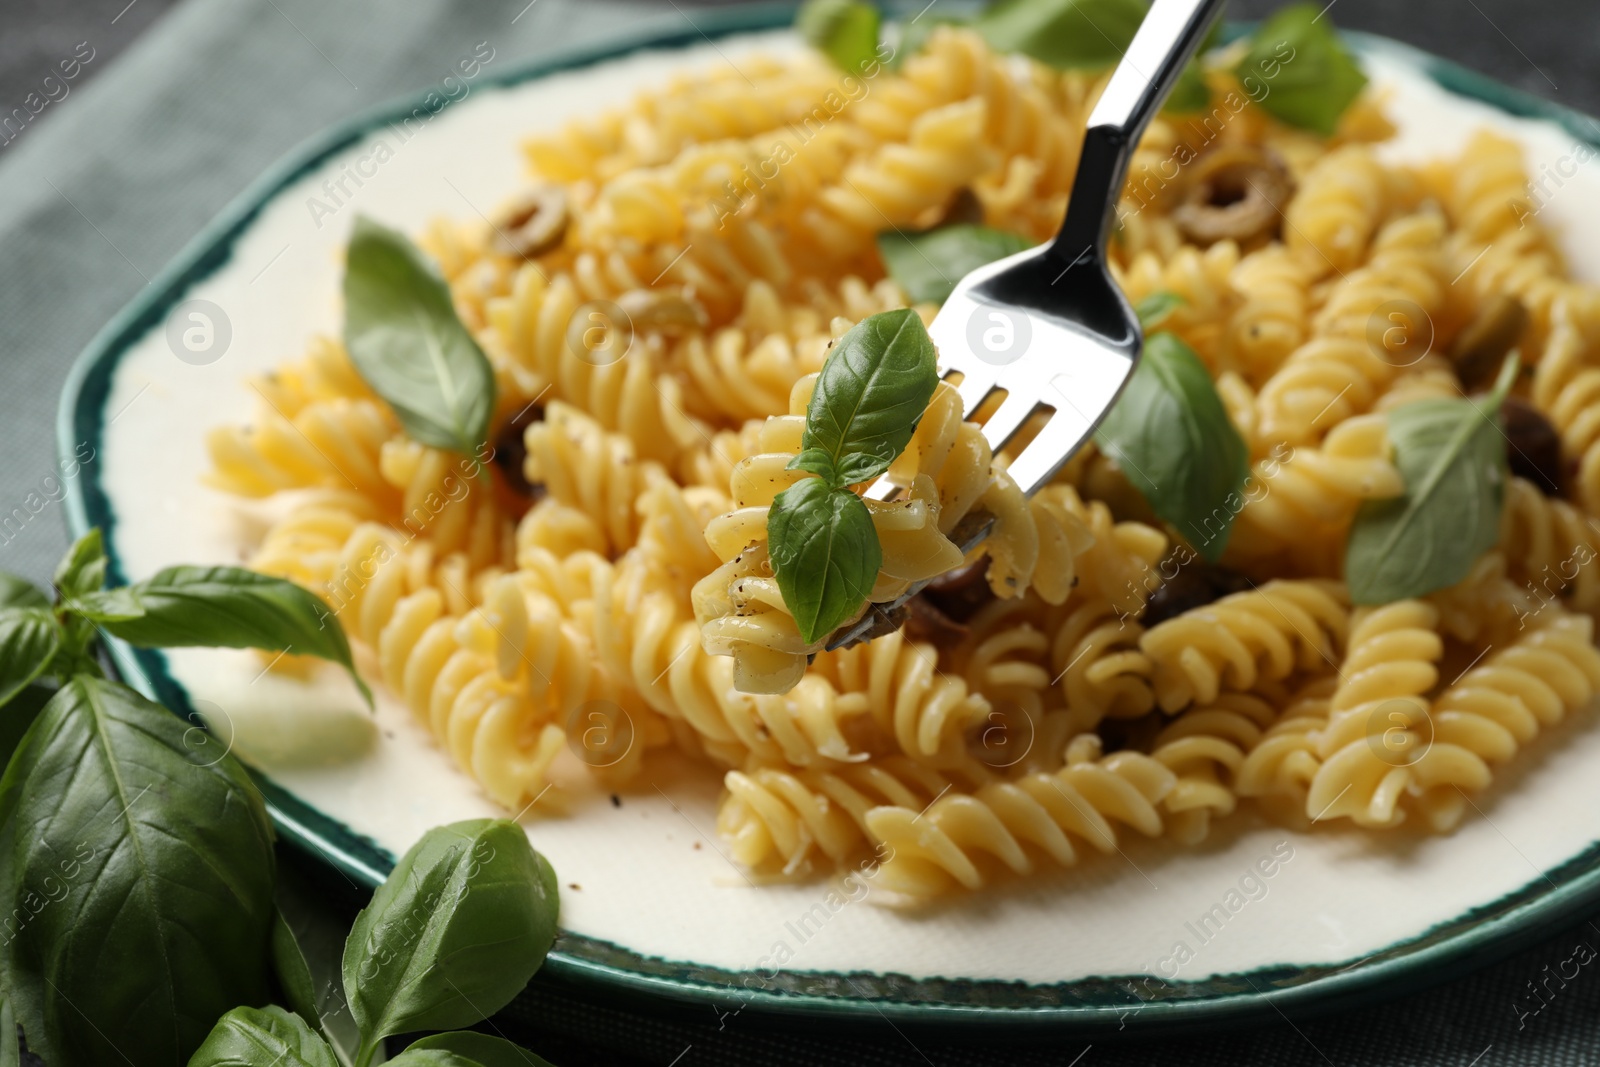 Photo of Delicious pasta with basil on fork over plate, closeup